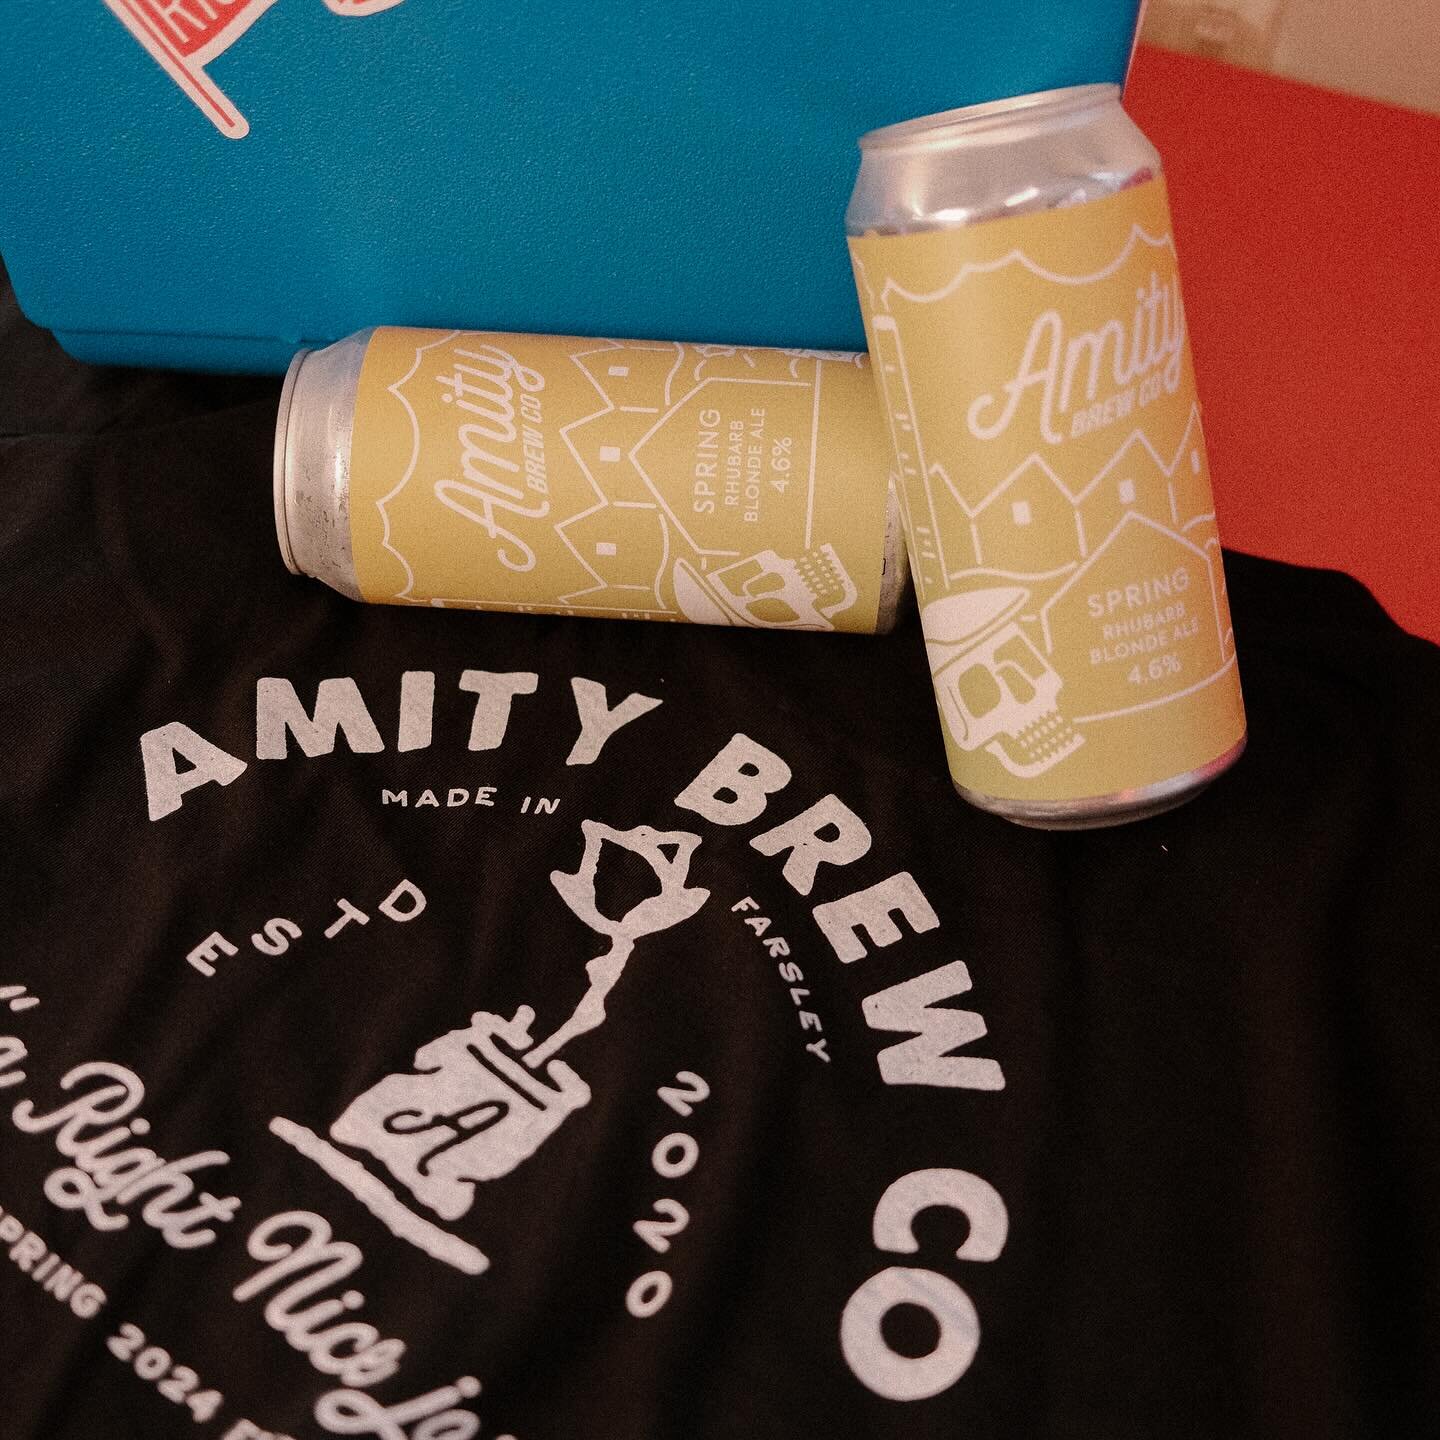 For a non drinker, designing a beer can was never really on my bucket list but this was so much fun! Thanks to @amitybrewco for letting me get involved, I&rsquo;m really chuffed with how it turned out and I think the tee is one of my best so far.
.
Y